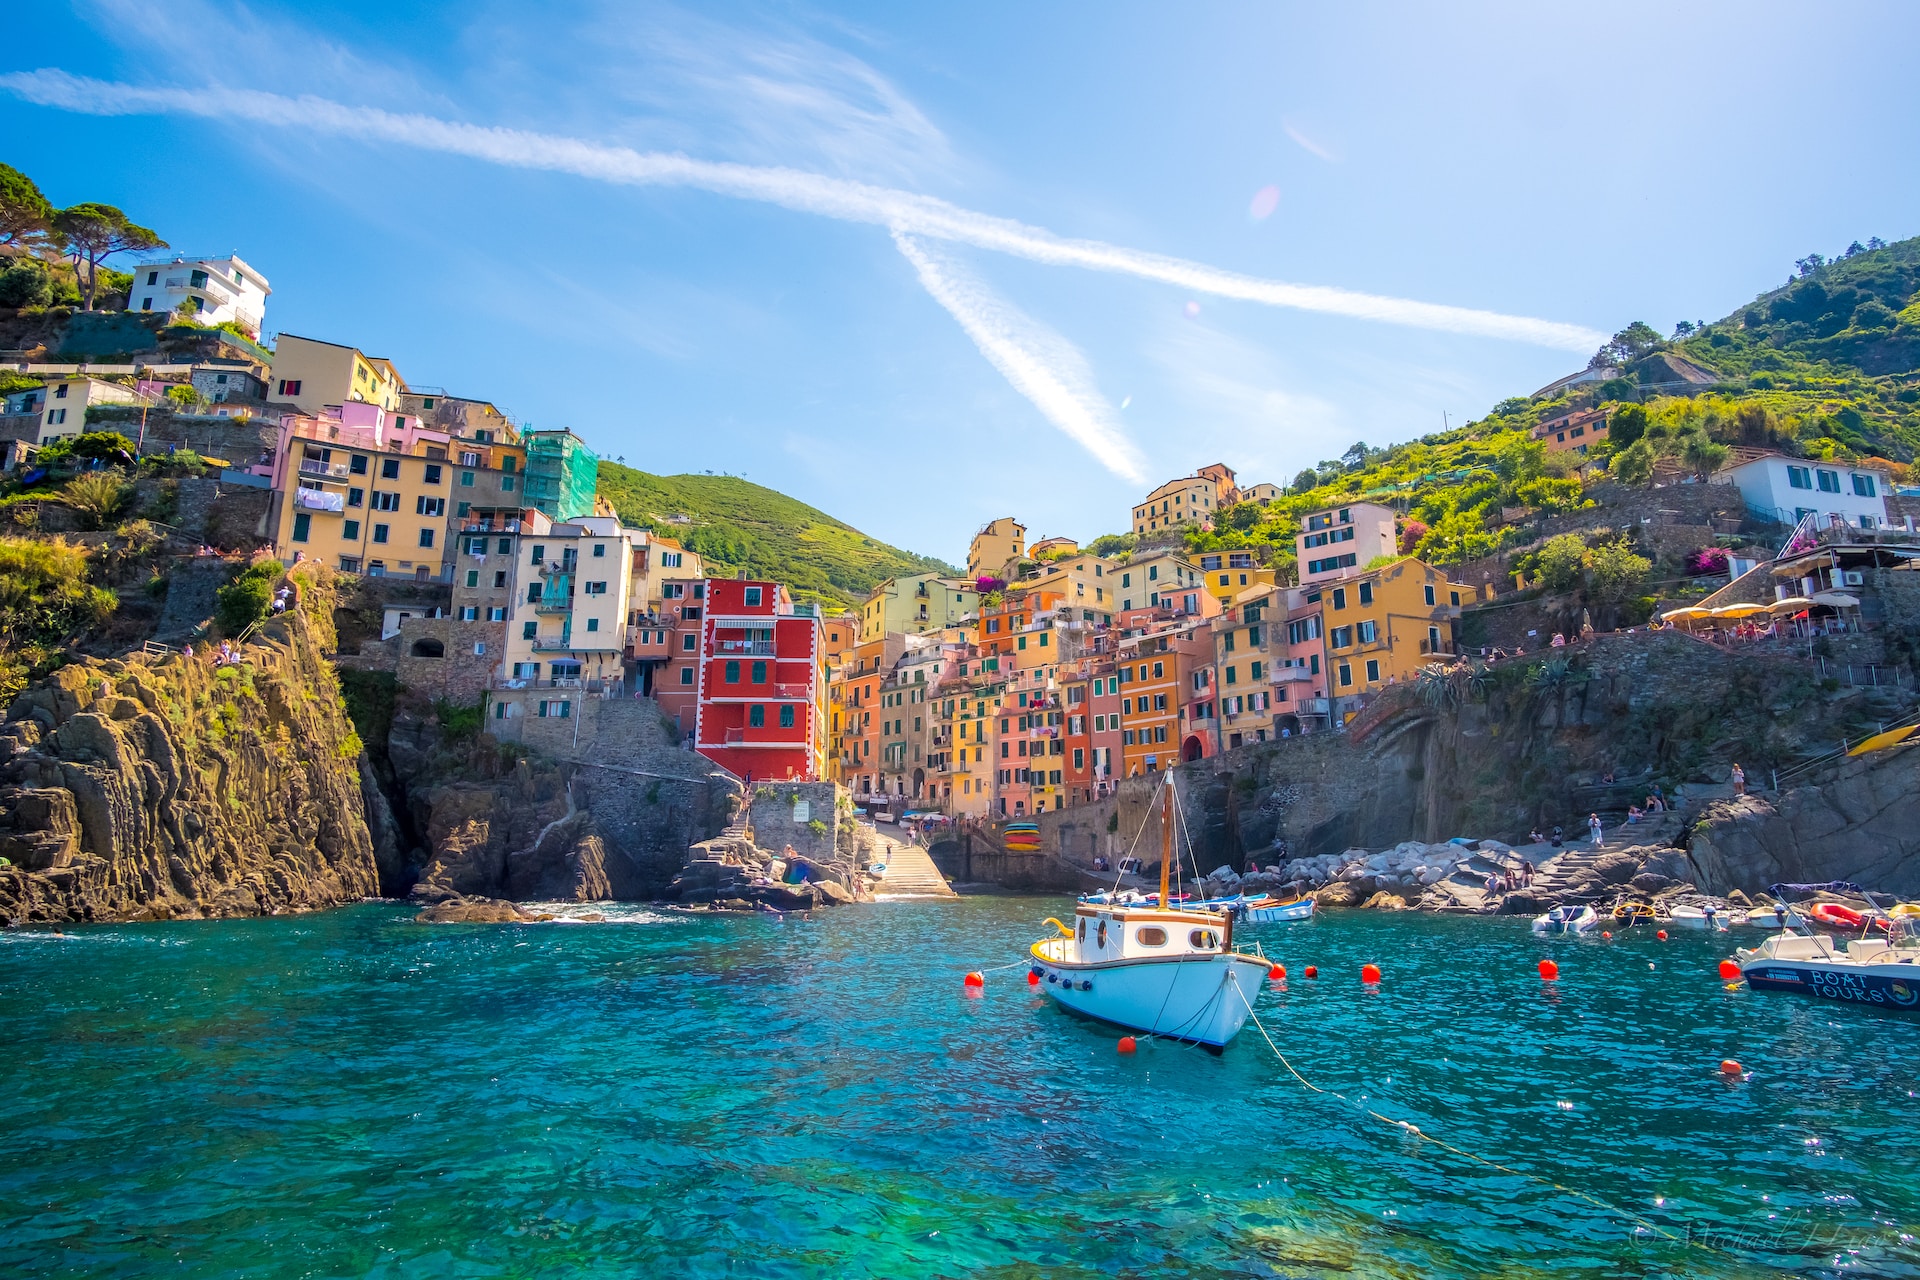 A charming photo of Cinque Terre from the water